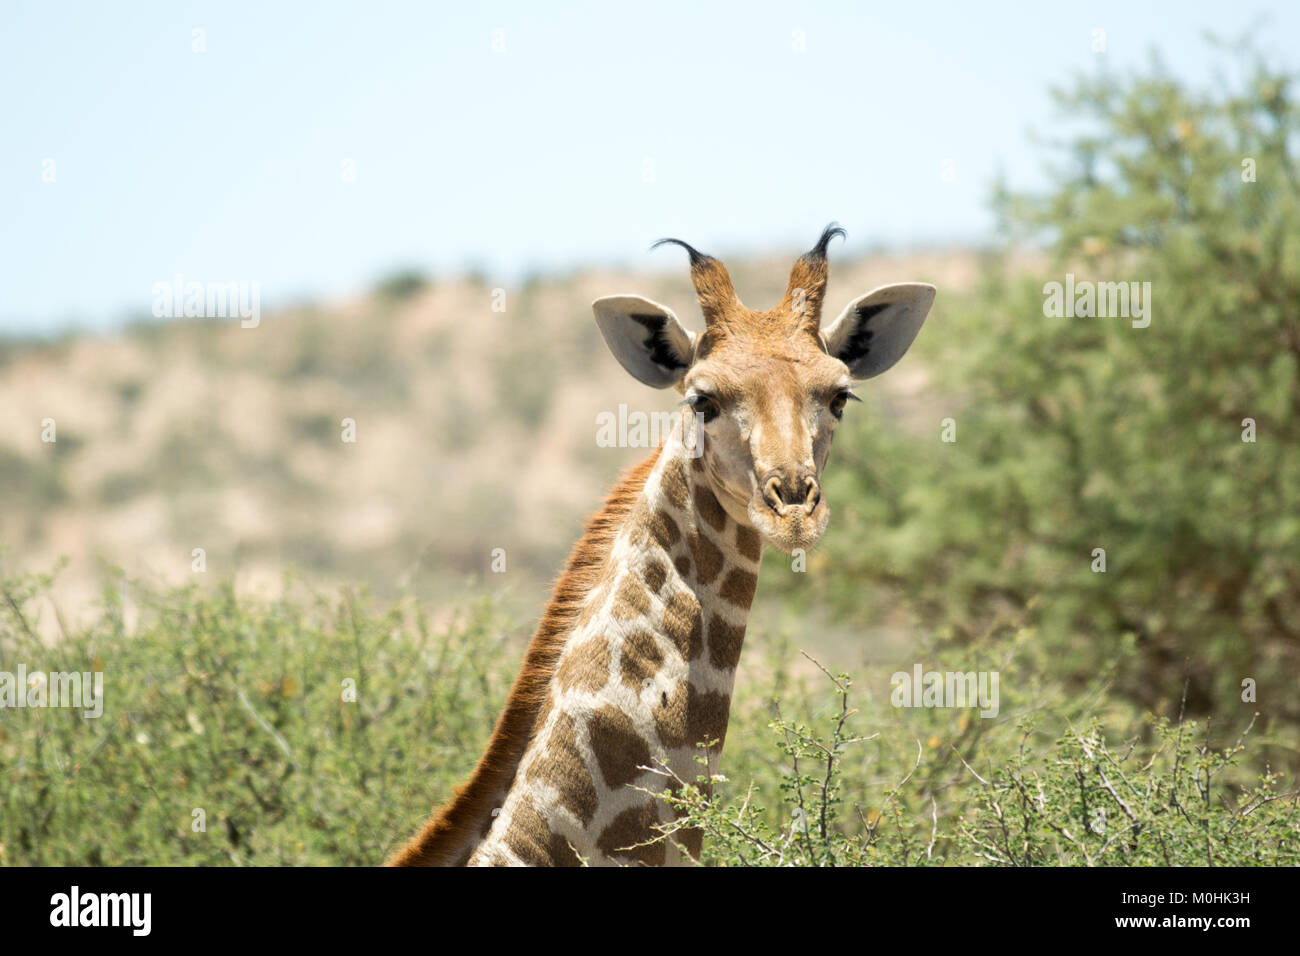 Young Giraffe looking at camera on sunny day near Windhoek, Namibia Stock Photo